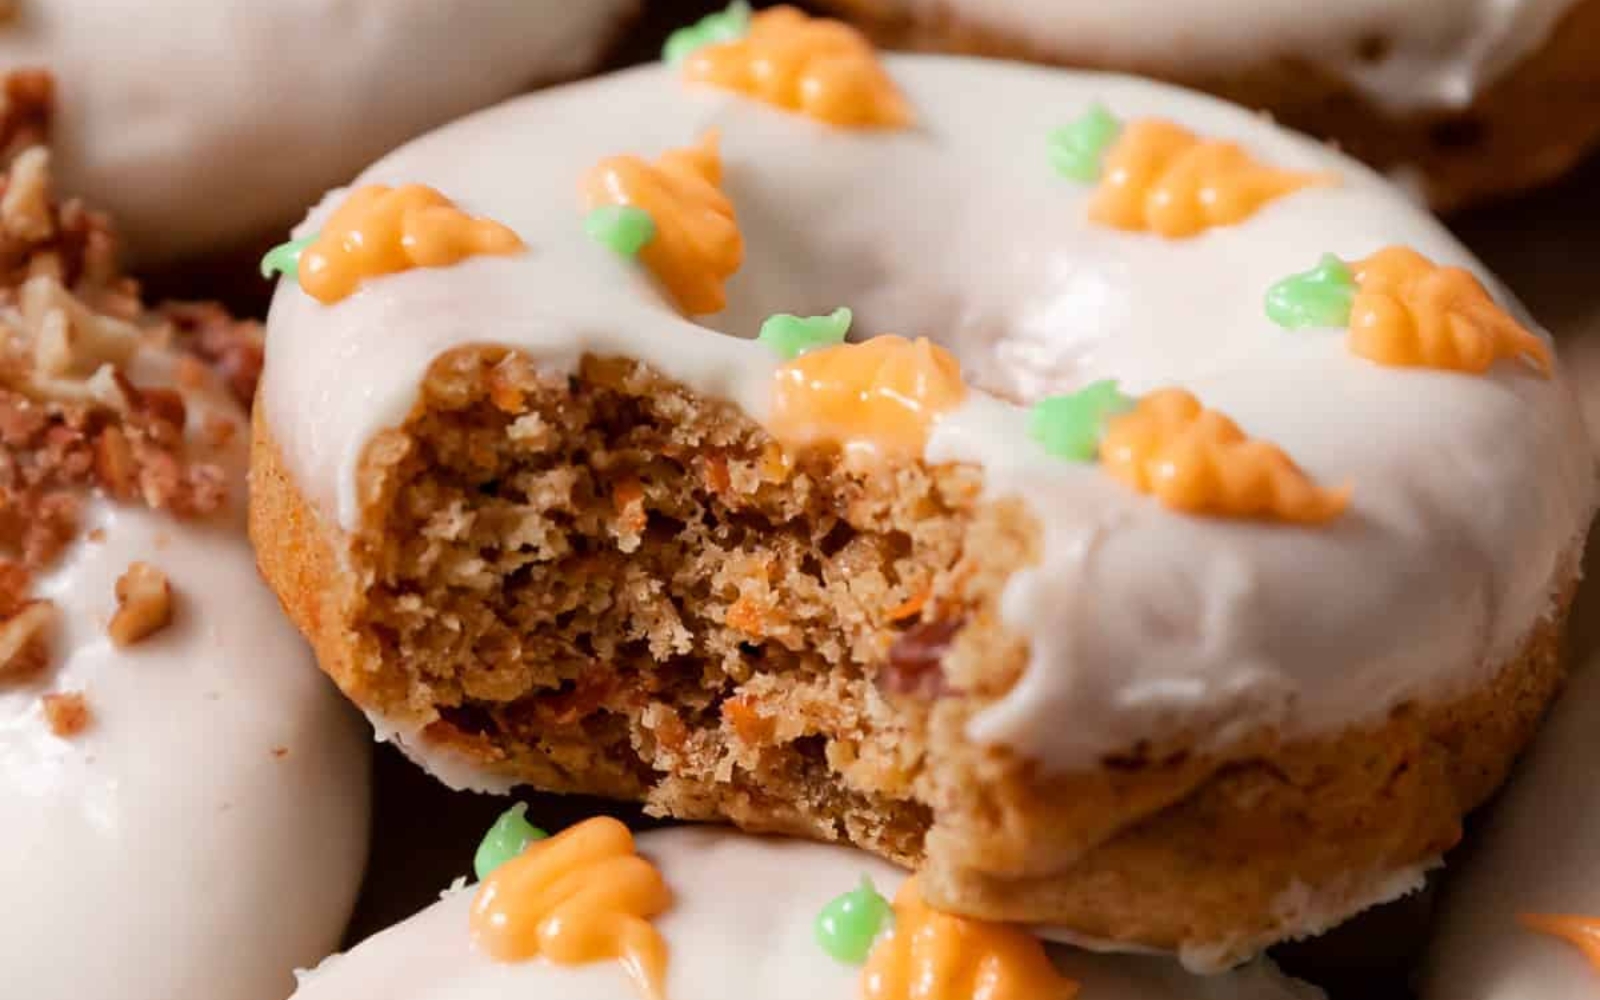 a carrot cake donut with frosting and little carrot decorations